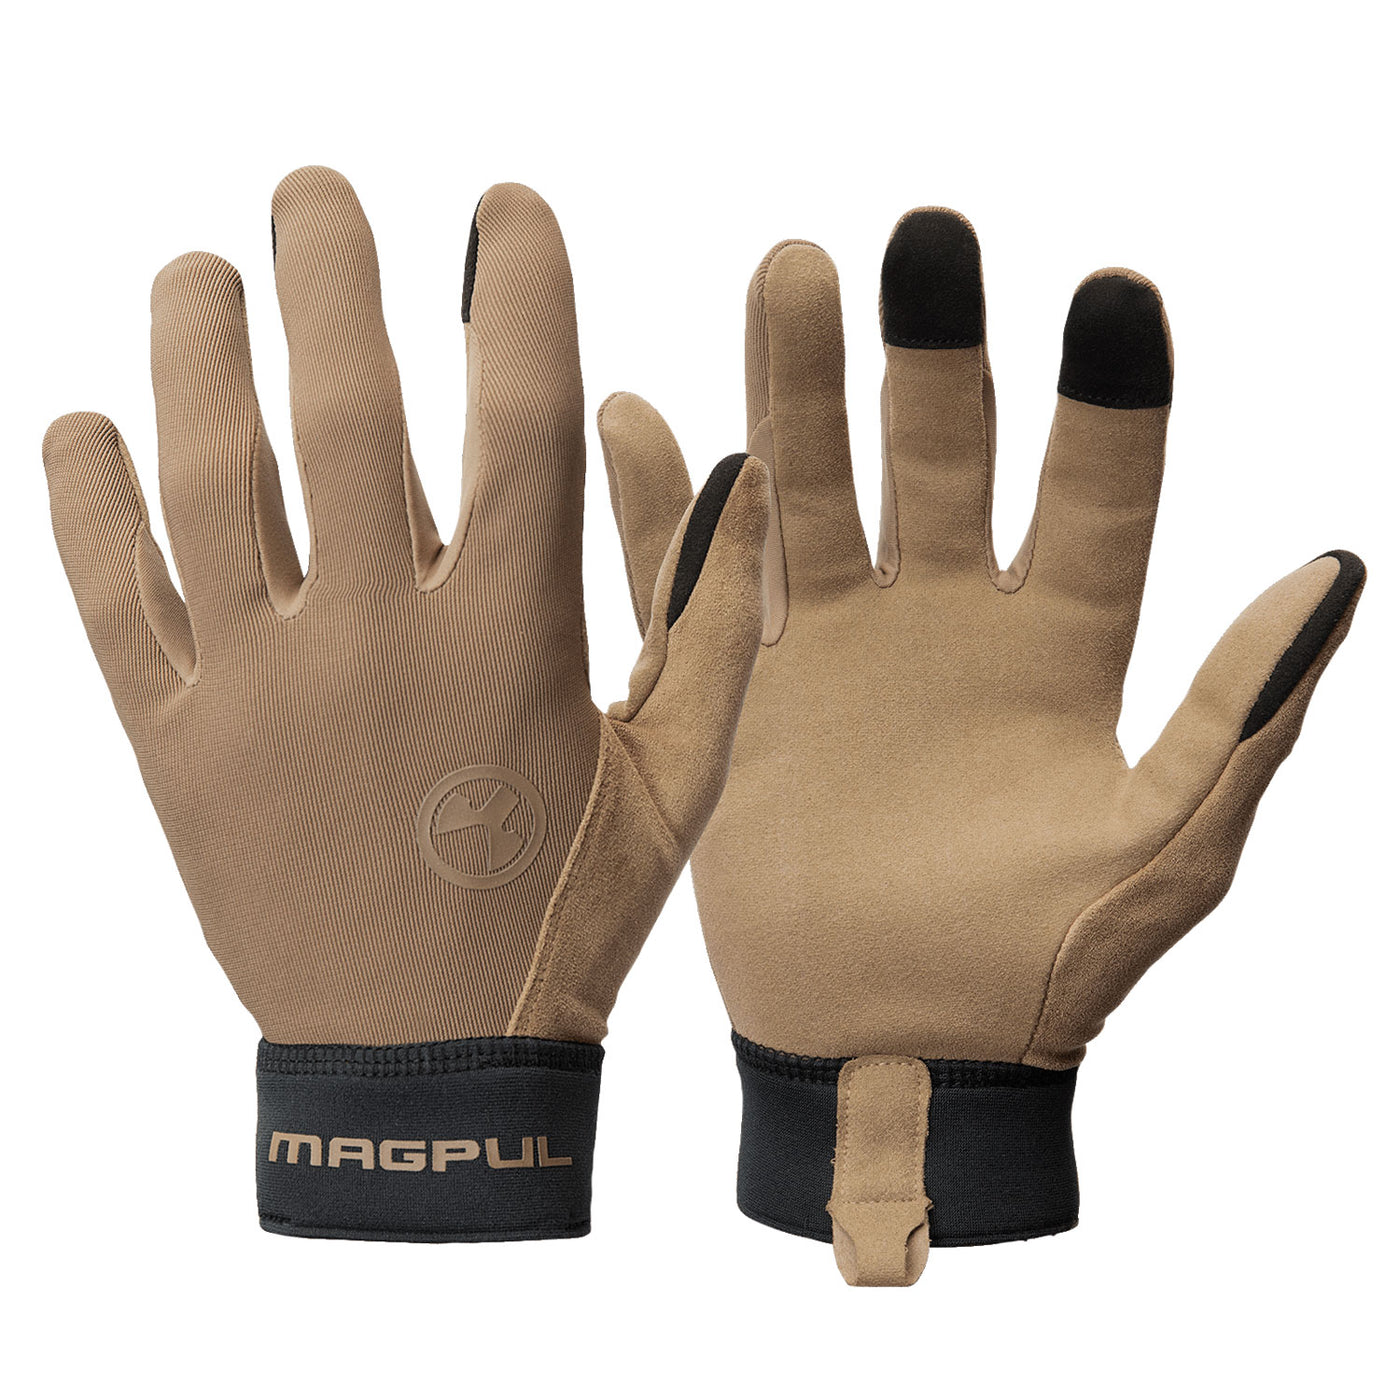 Magpul Industries Corp Technical 2.0, Magpul Mag1014-251 Technical Glove 2.0   Lg   Coy